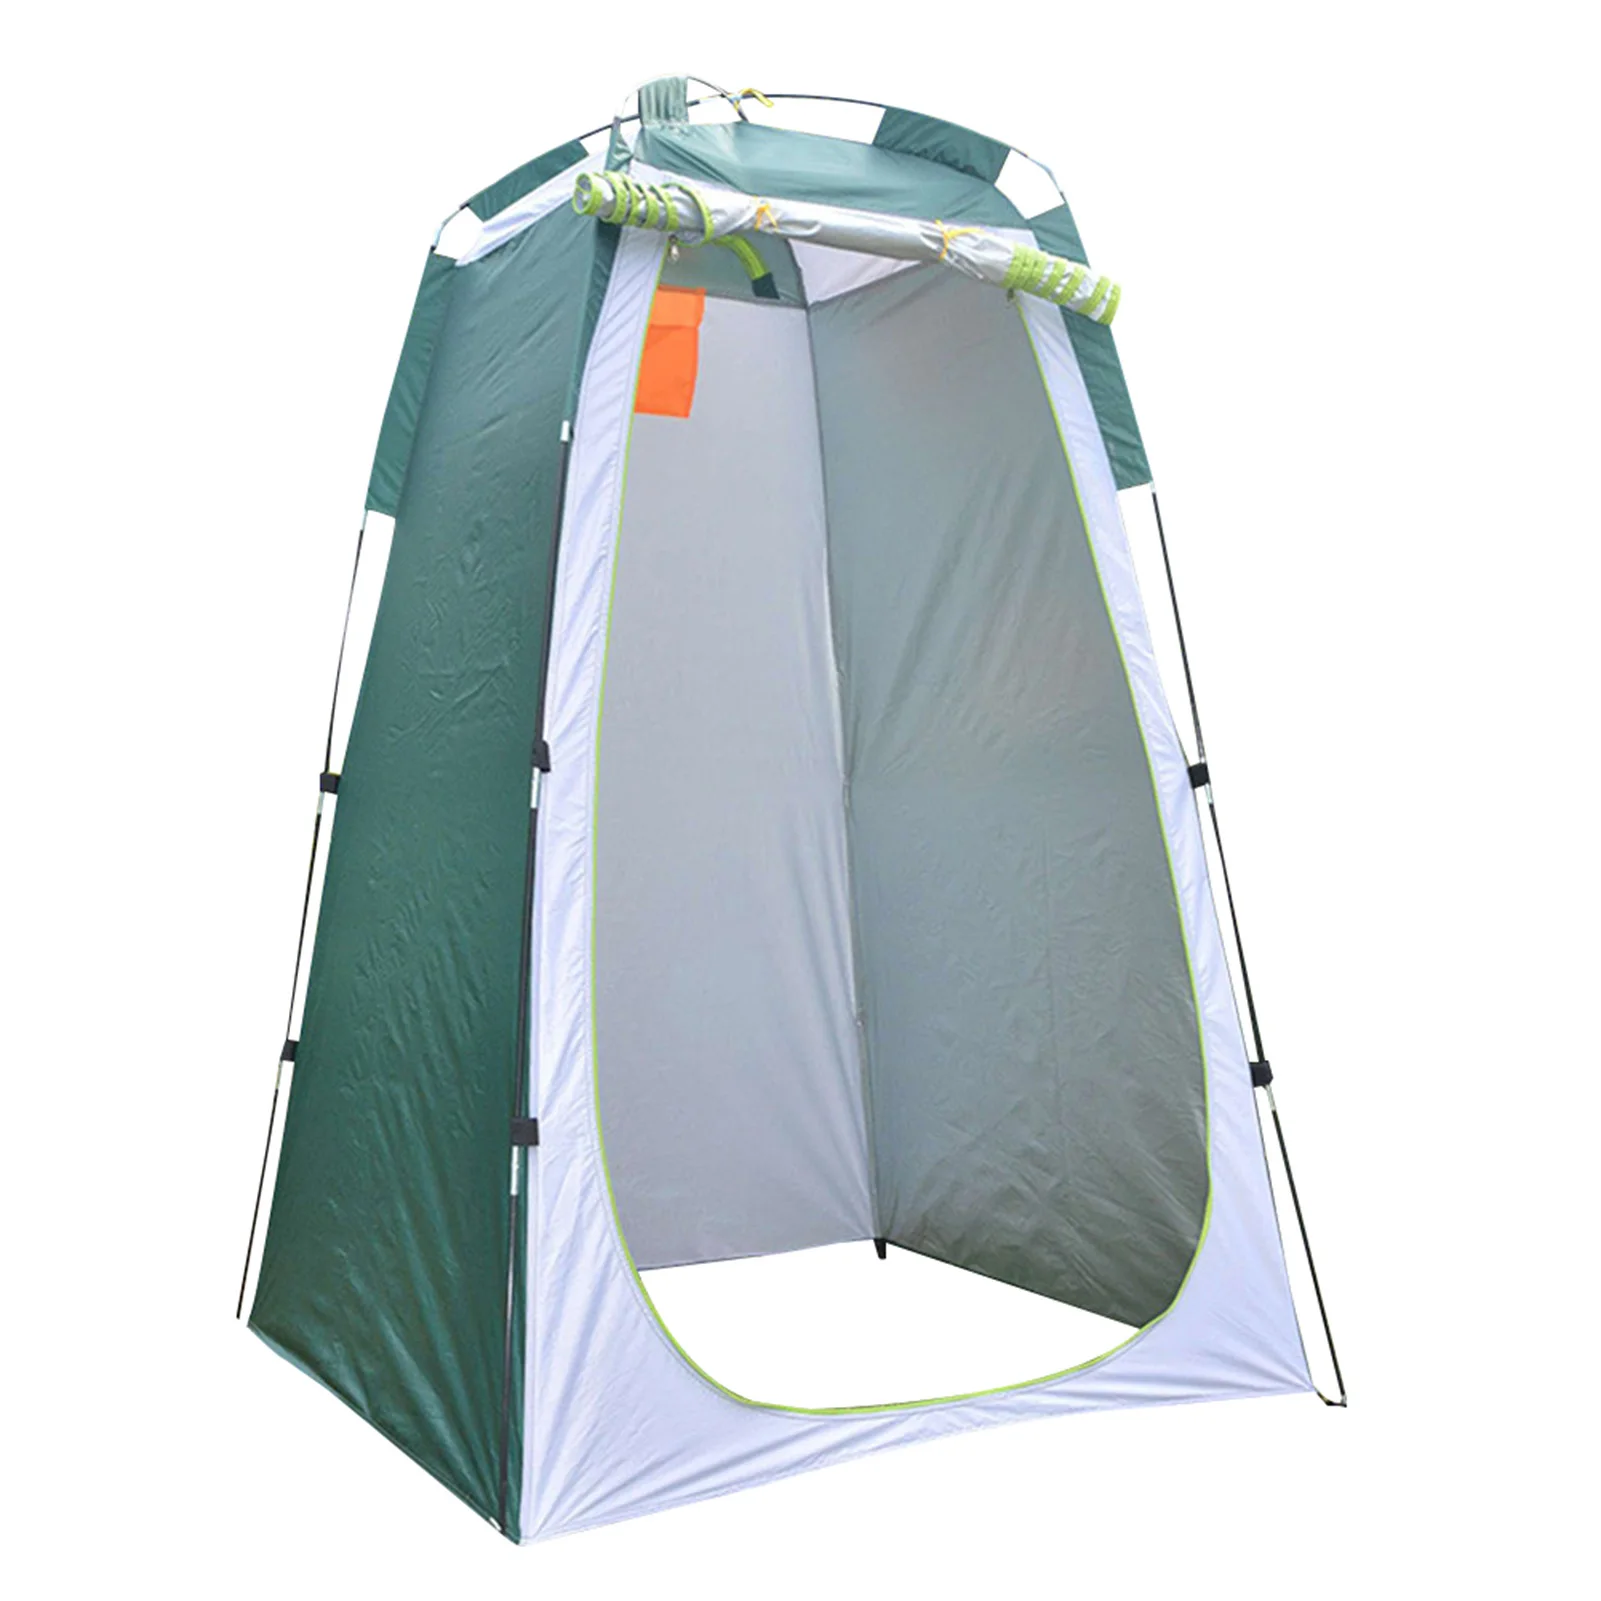 https://ae01.alicdn.com/kf/H2575e44dbe6f41fba804deb022aa5923L/protable-Privacy-Shower-Tent-outdoor.jpg